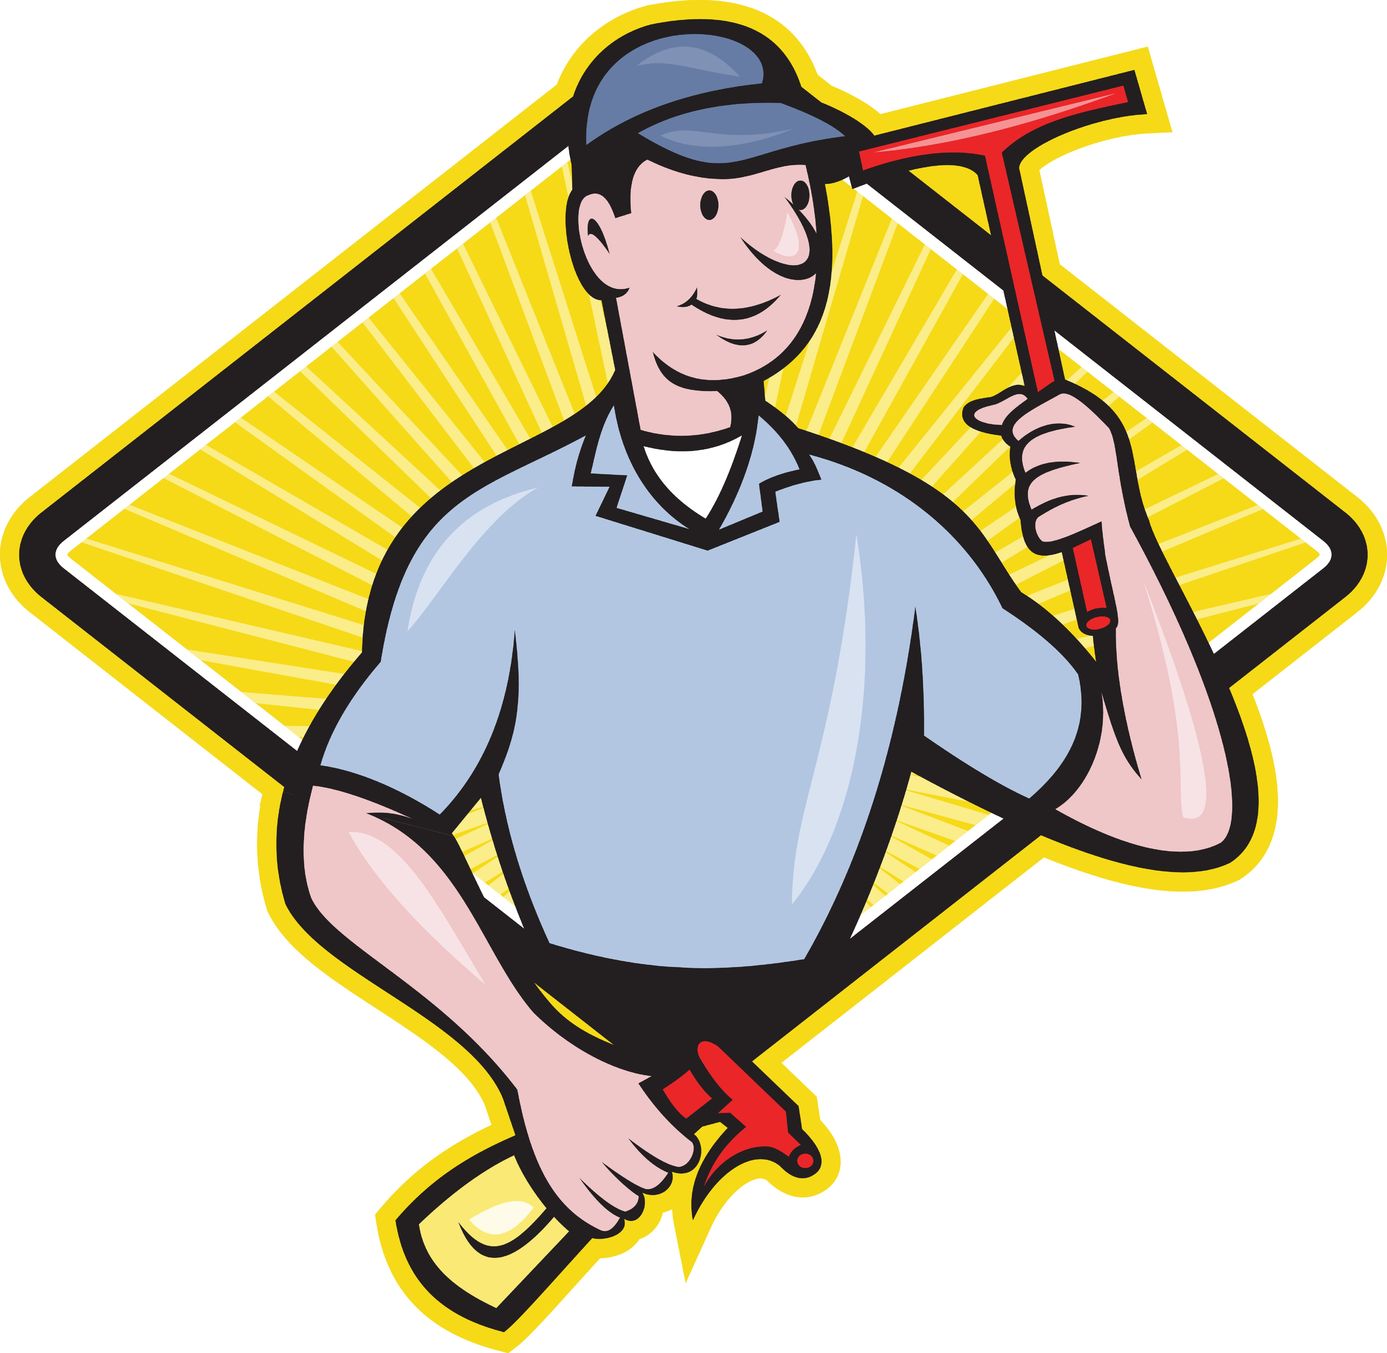 Cleaning clip art images free clipart images